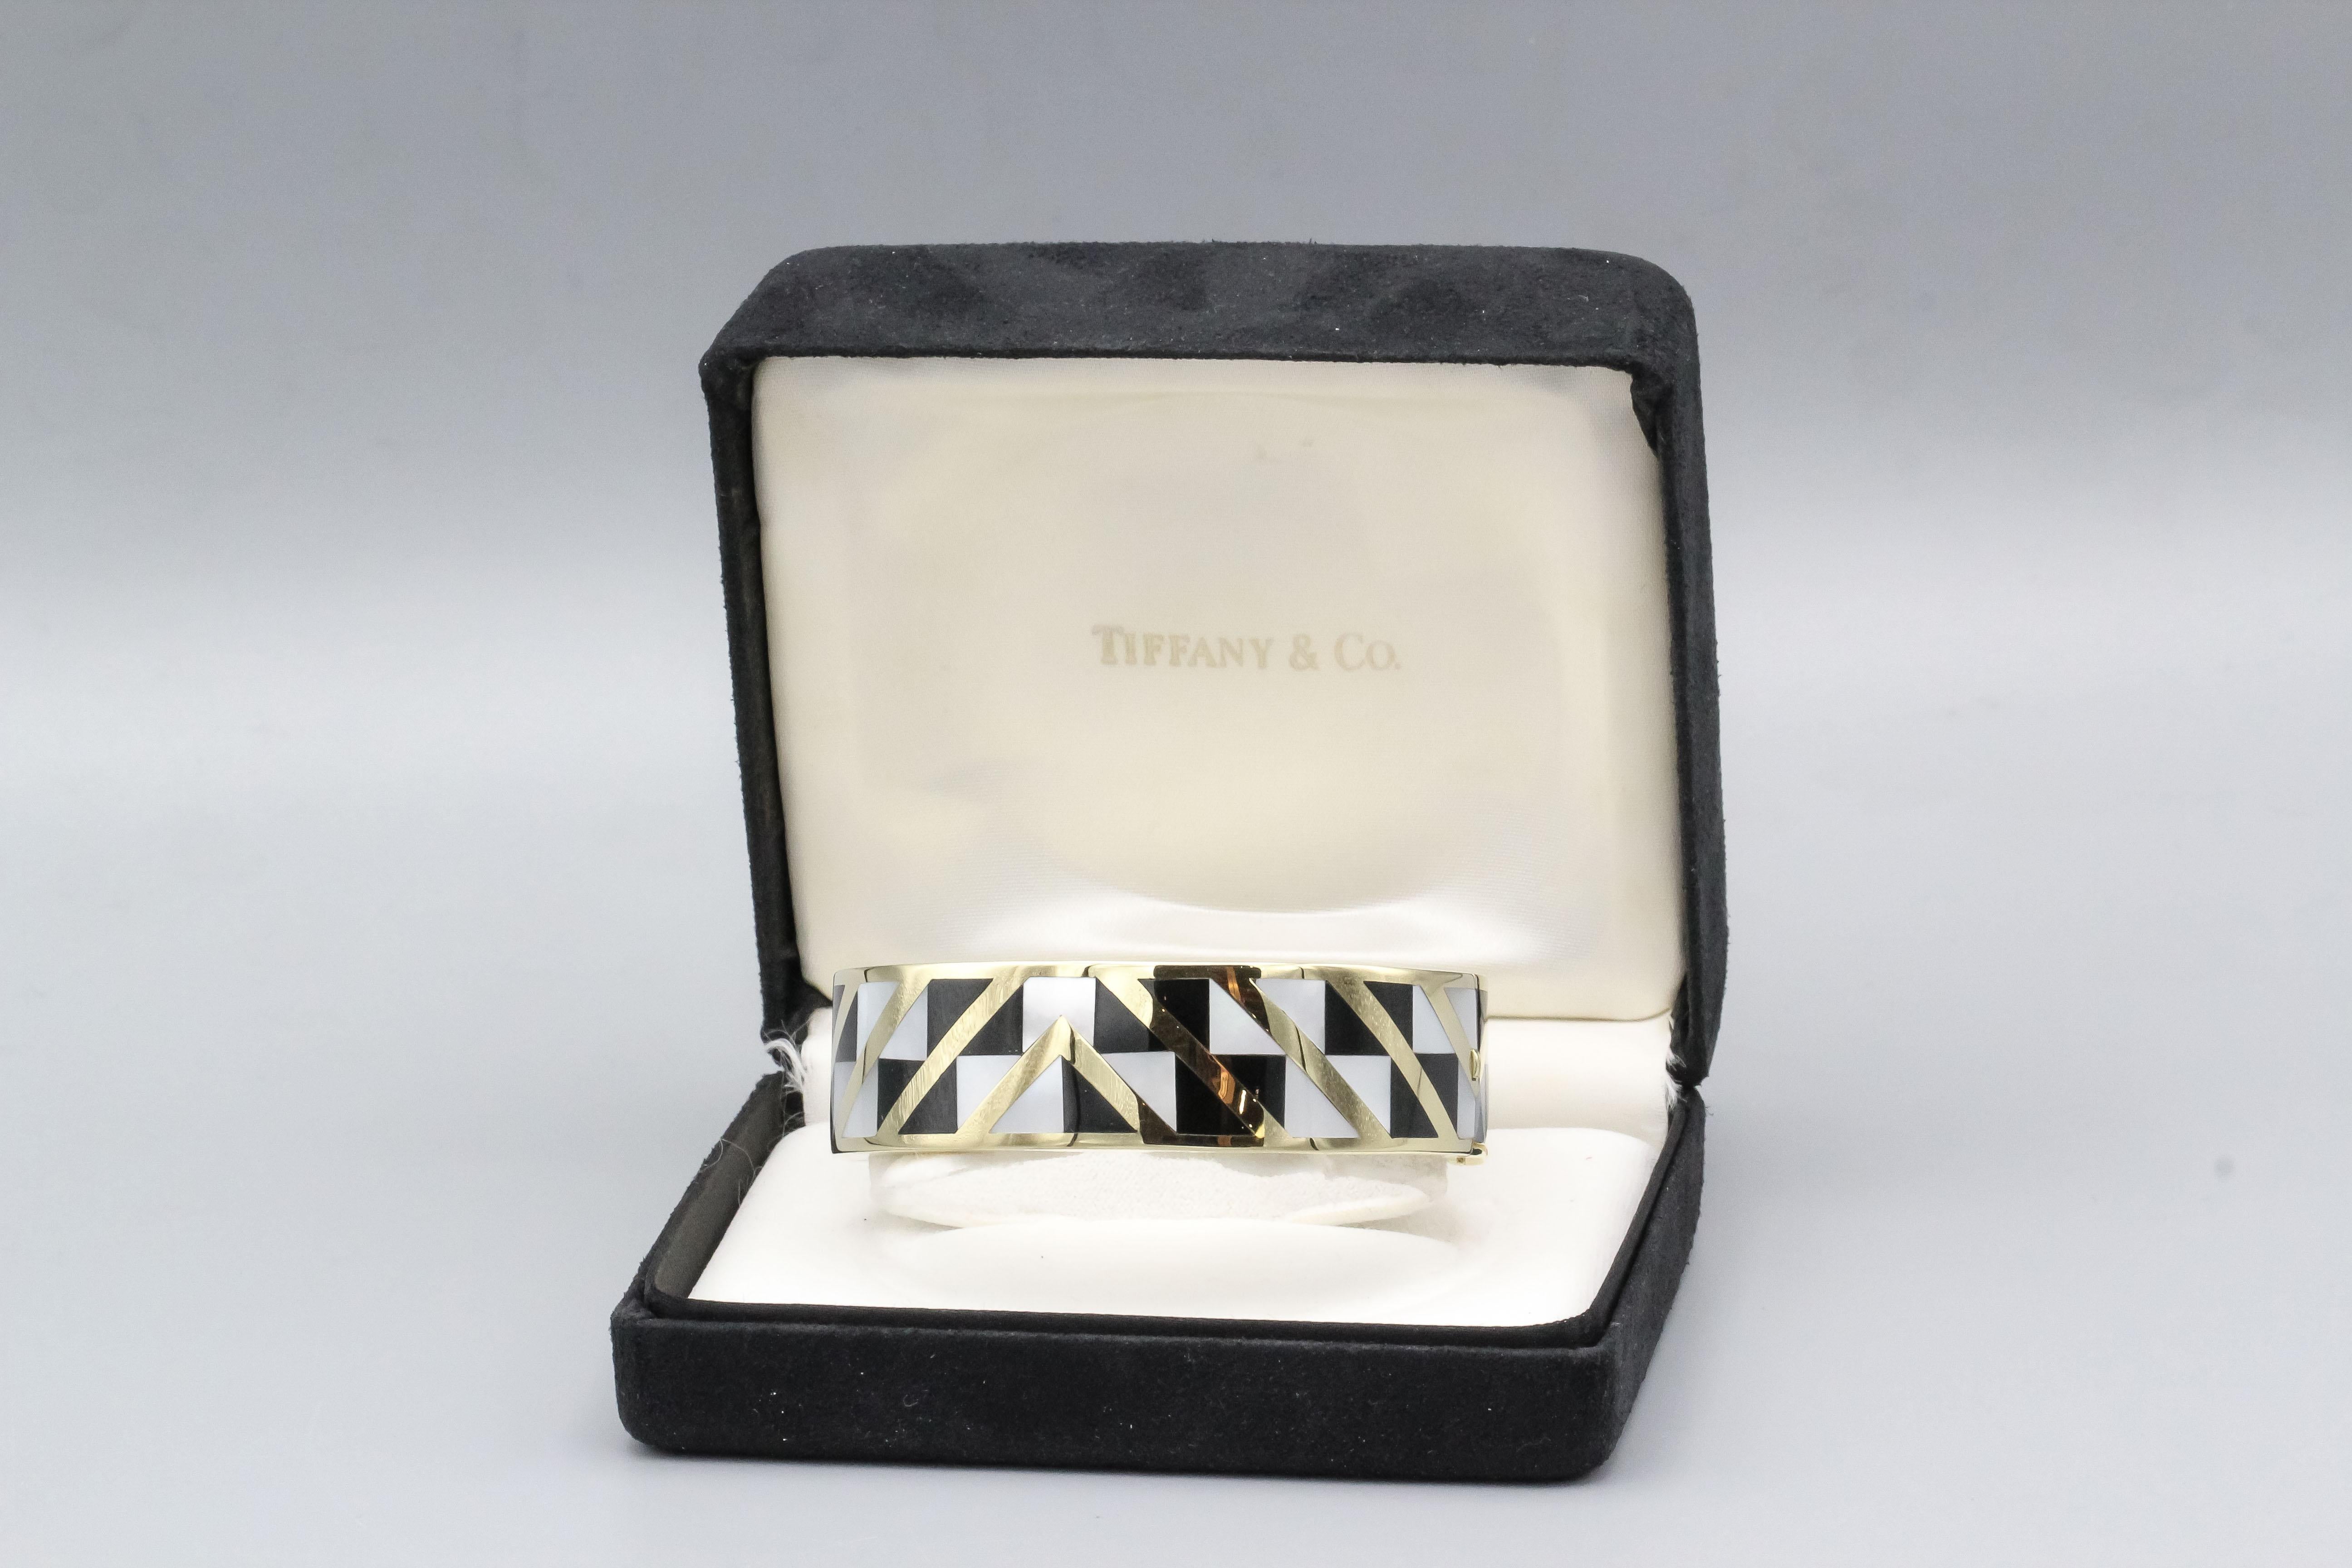 Fine 18K yellow gold bangle bracelet with inlaid mother of pearl and black jade, by Tiffany & Co. designed by Angela Cummings circa 1970s. It features a desirable geometric pattern that is stylish and distinctive.  Will comfortably fit a 6-6.5